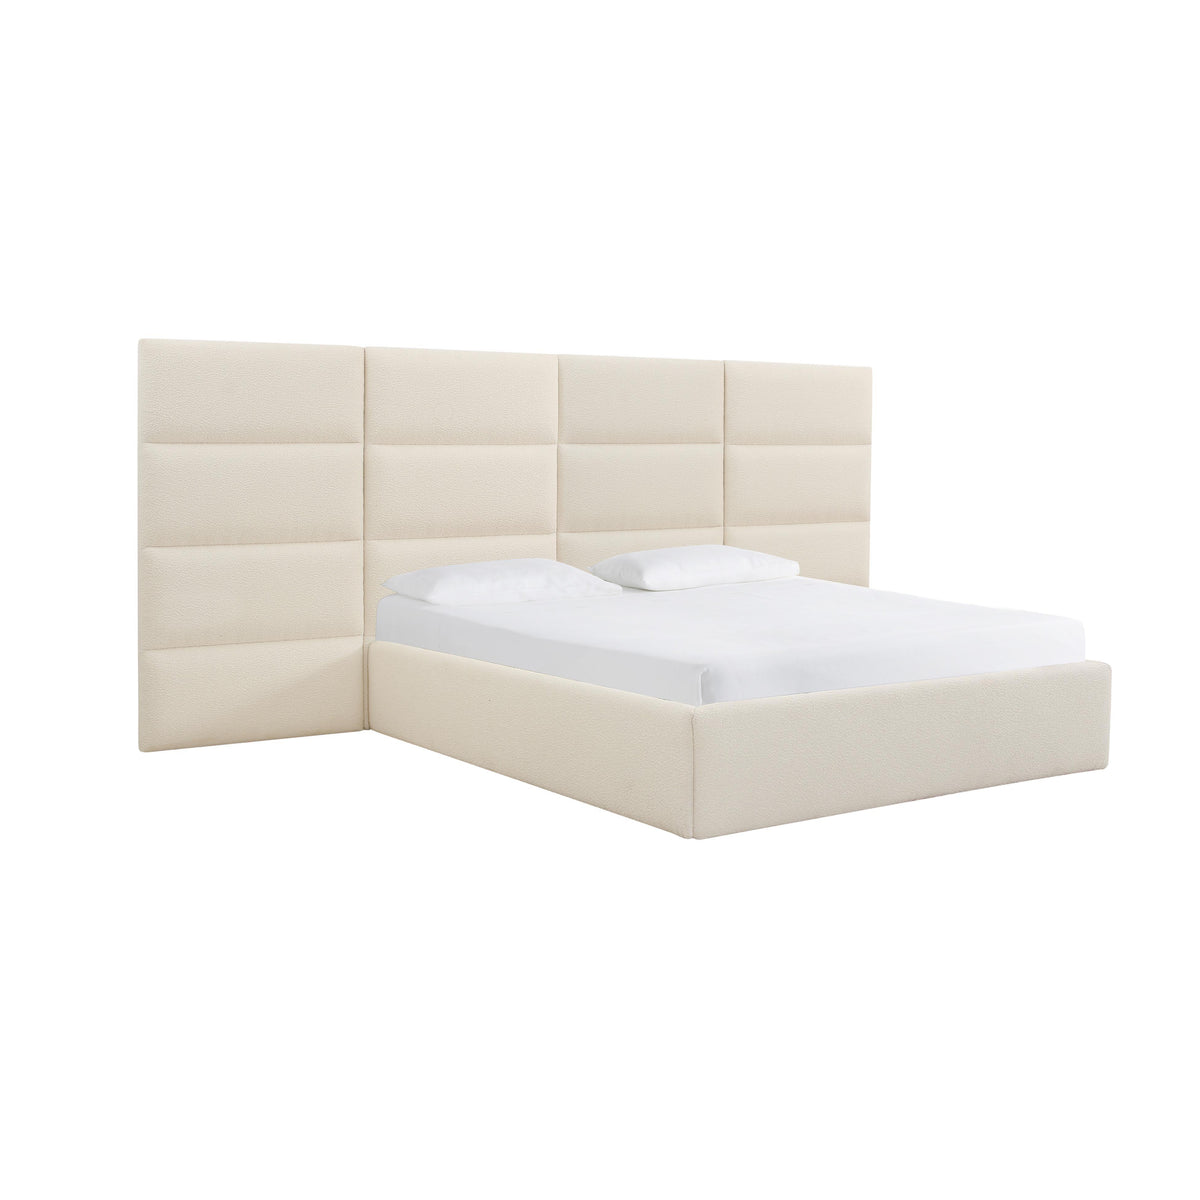 TOV Furniture Modern Eliana Cream Boucle King Bed with Wings - TOV-B68730-WINGS